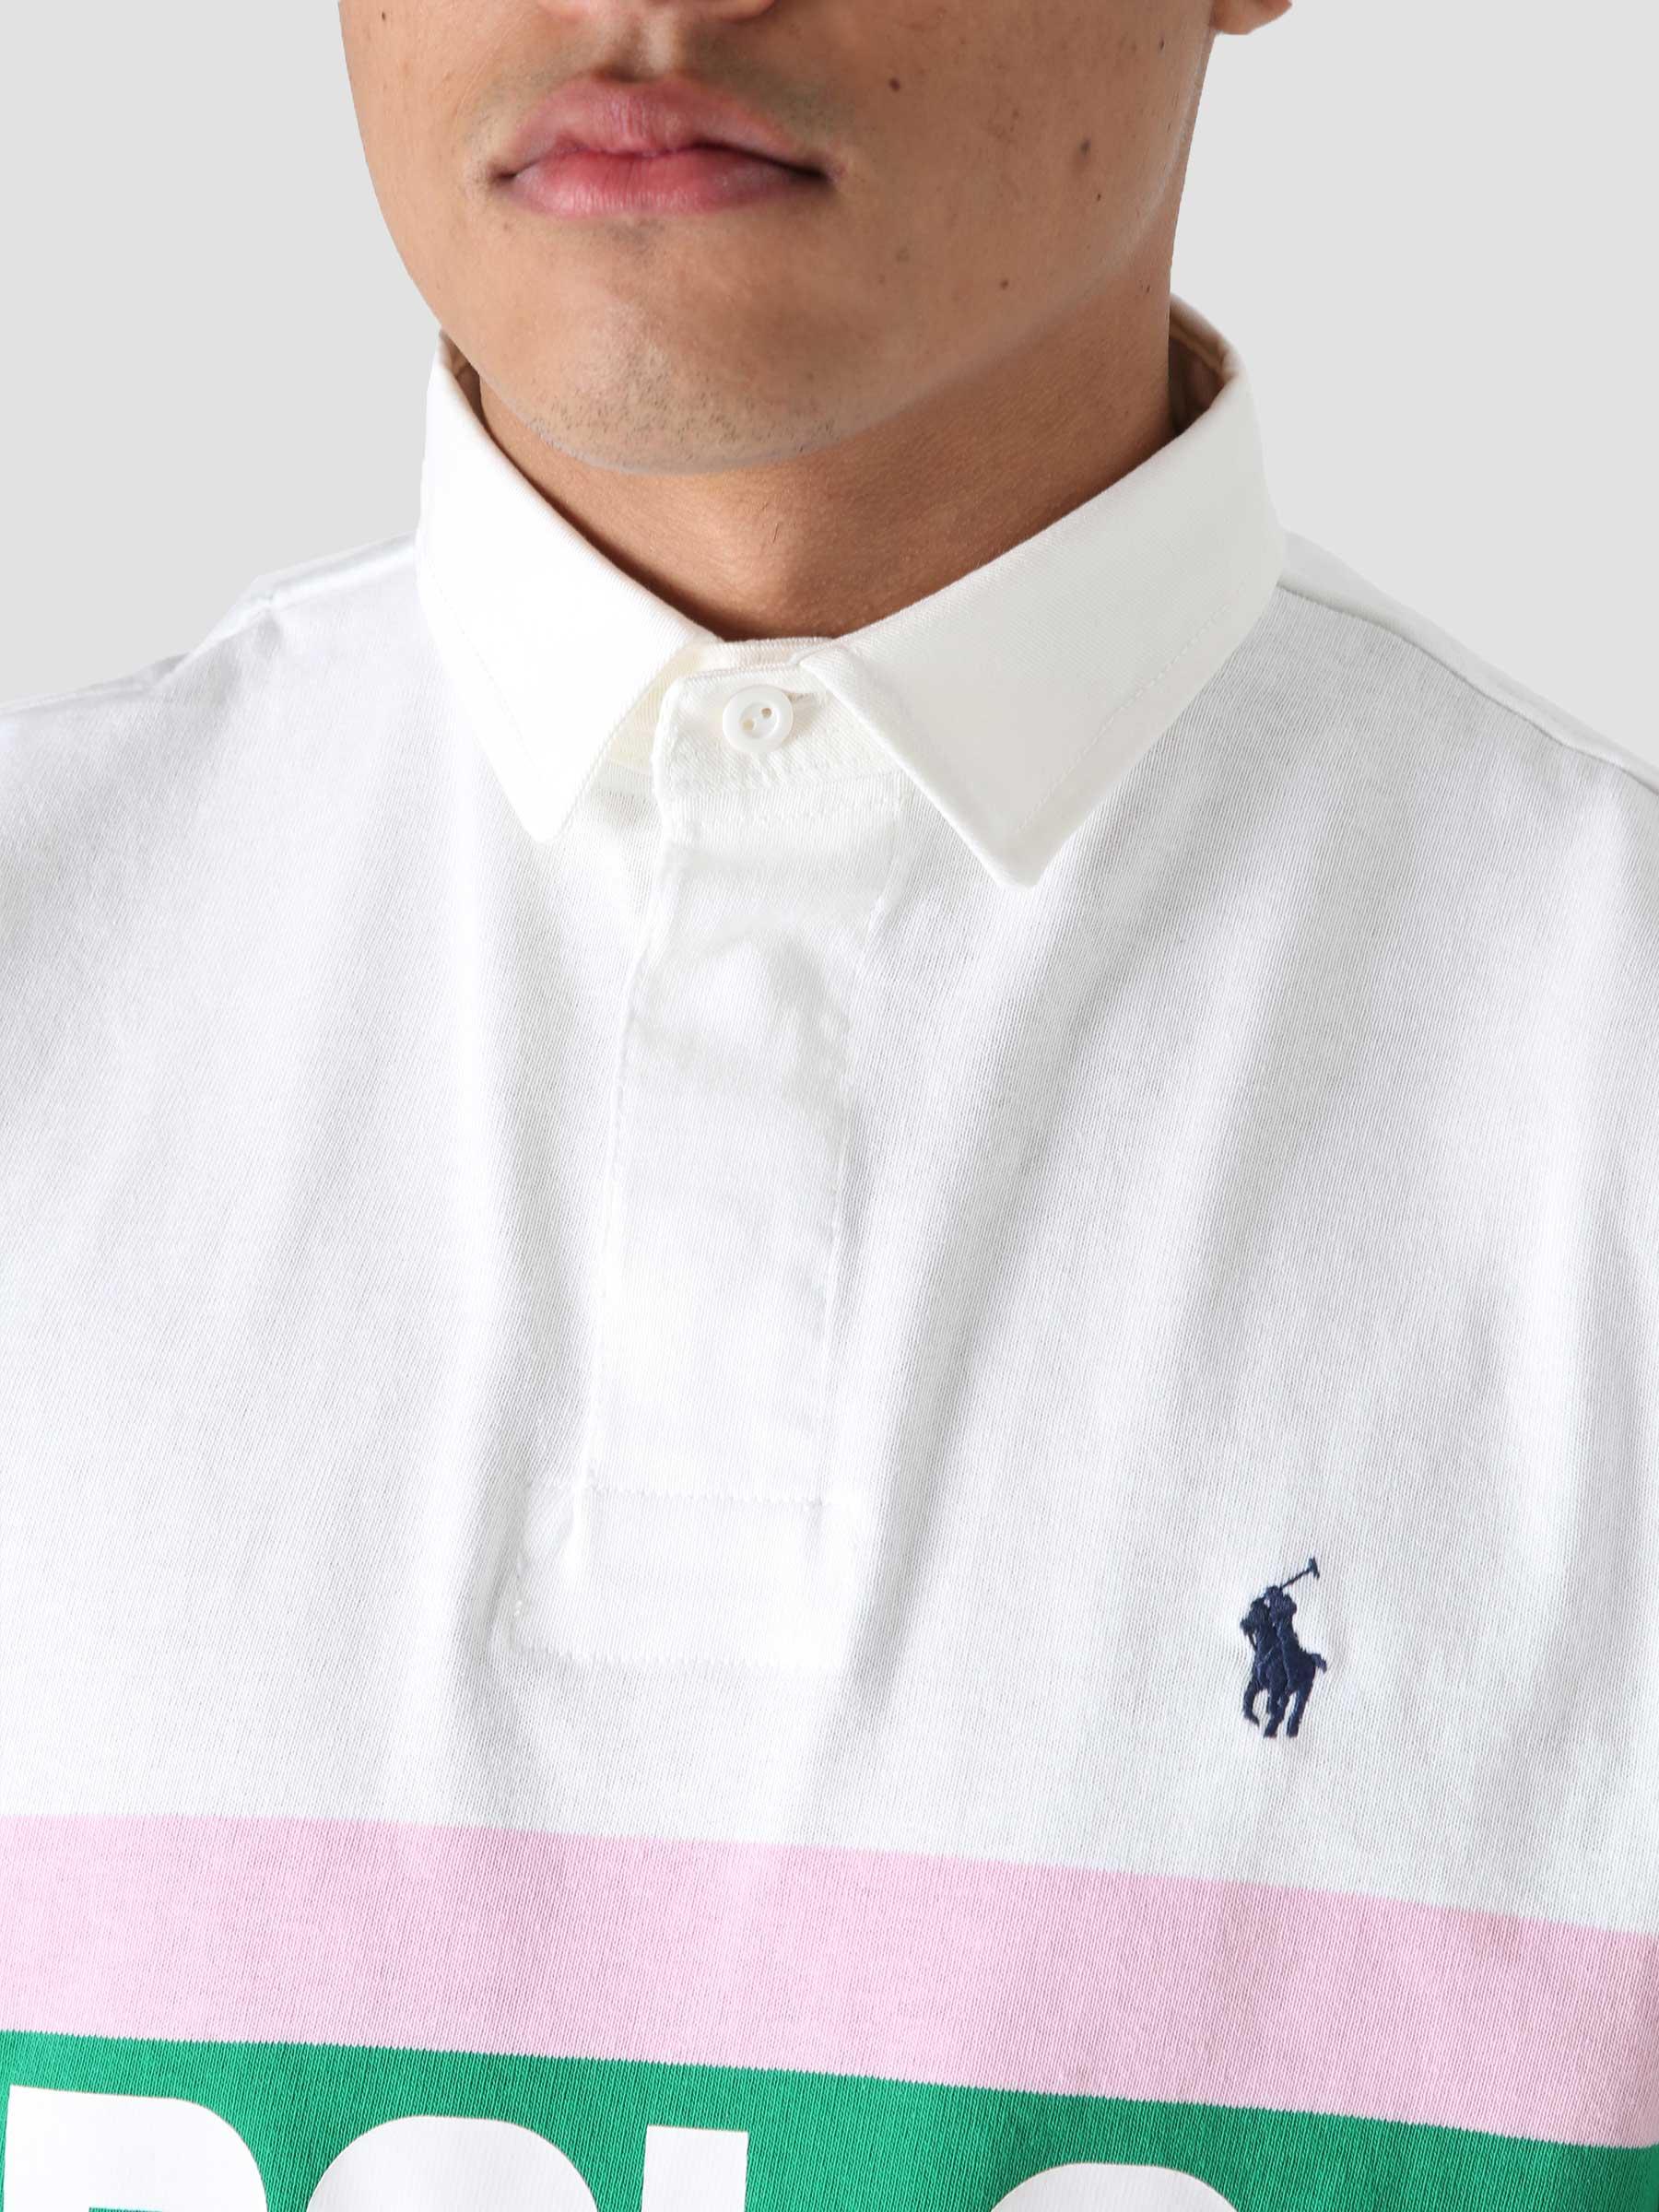 RL Long Sleeve Rugby Polo Classic Oxford White Multi 710865022001